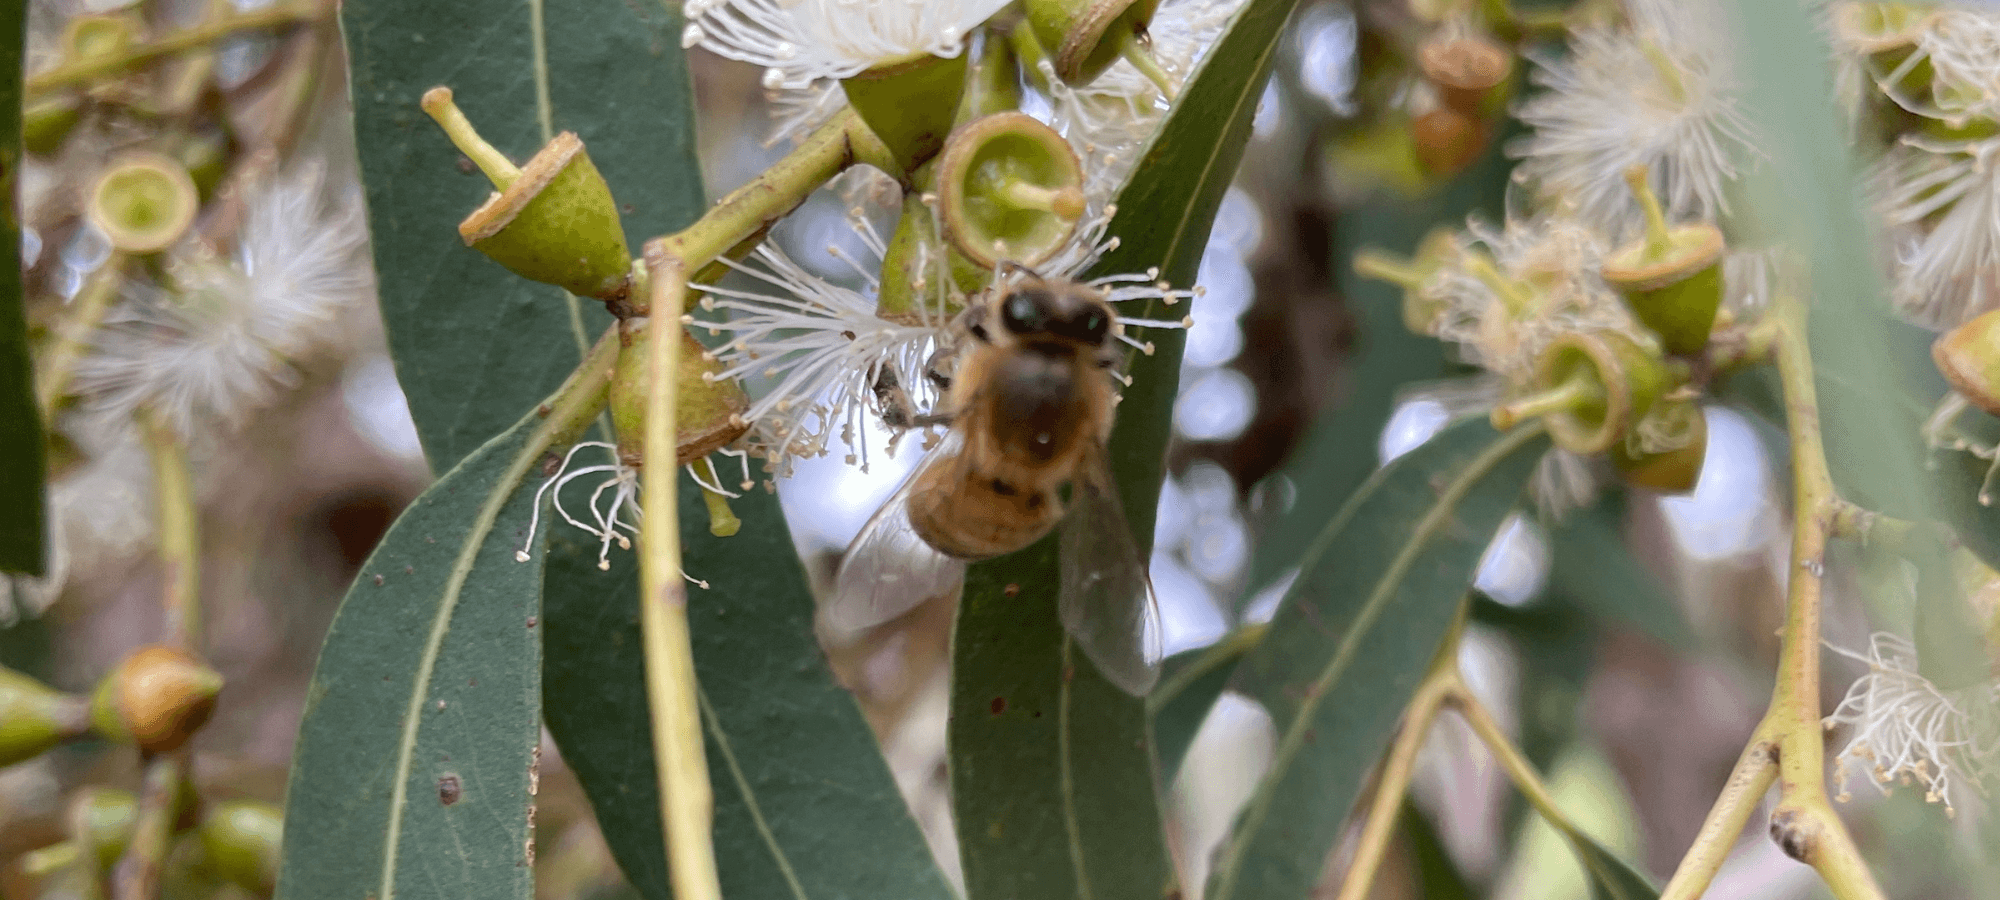 Bee Removal Experts - Southern Cross Bees